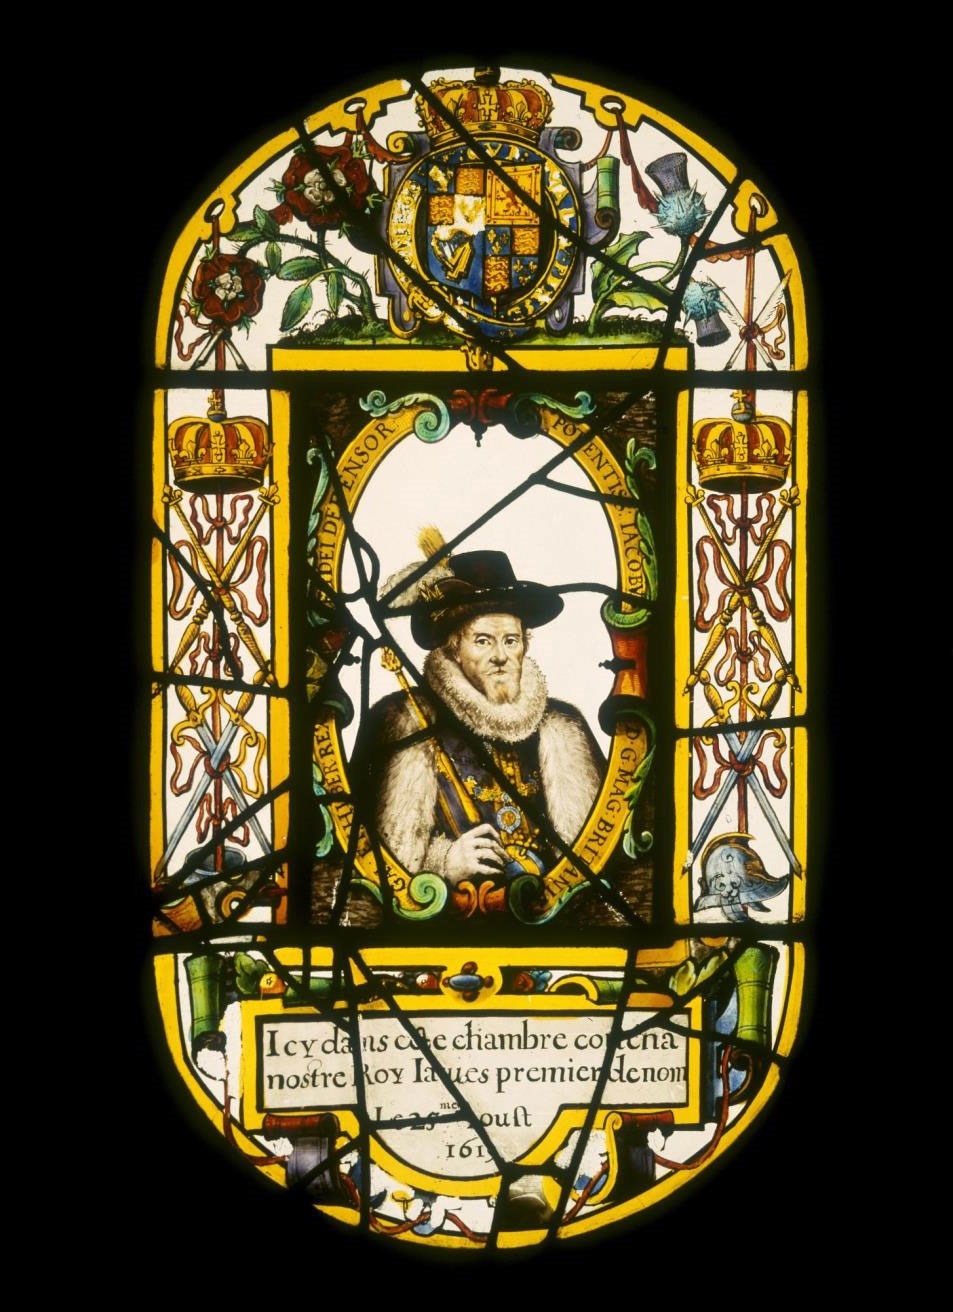 Stained glass panel showing James VI and I